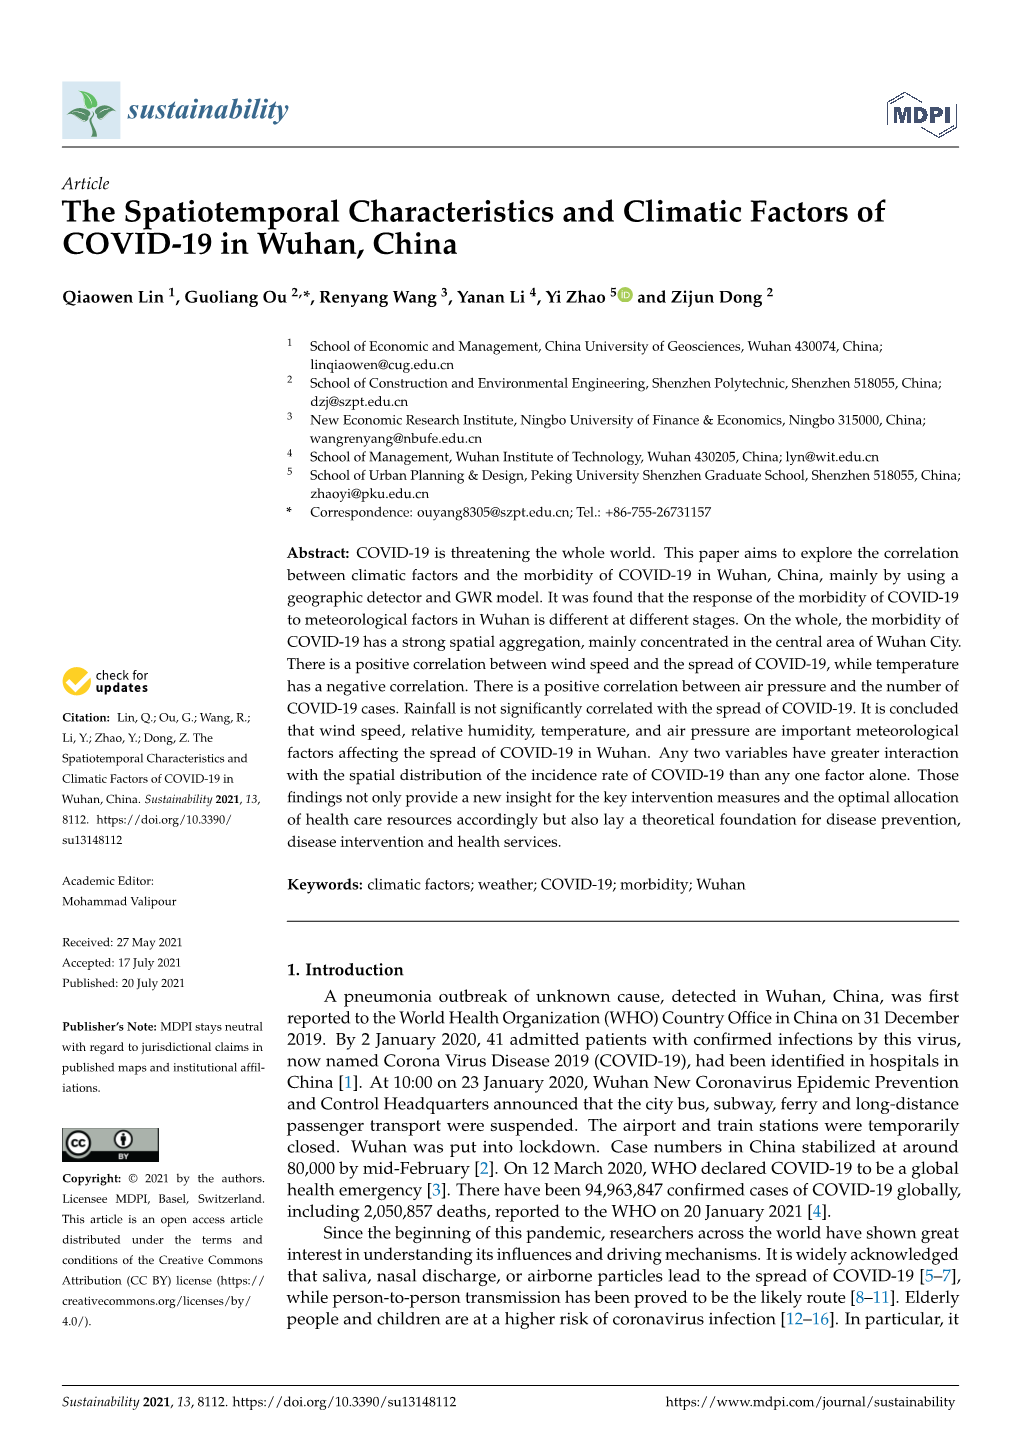 The Spatiotemporal Characteristics and Climatic Factors of COVID-19 in Wuhan, China